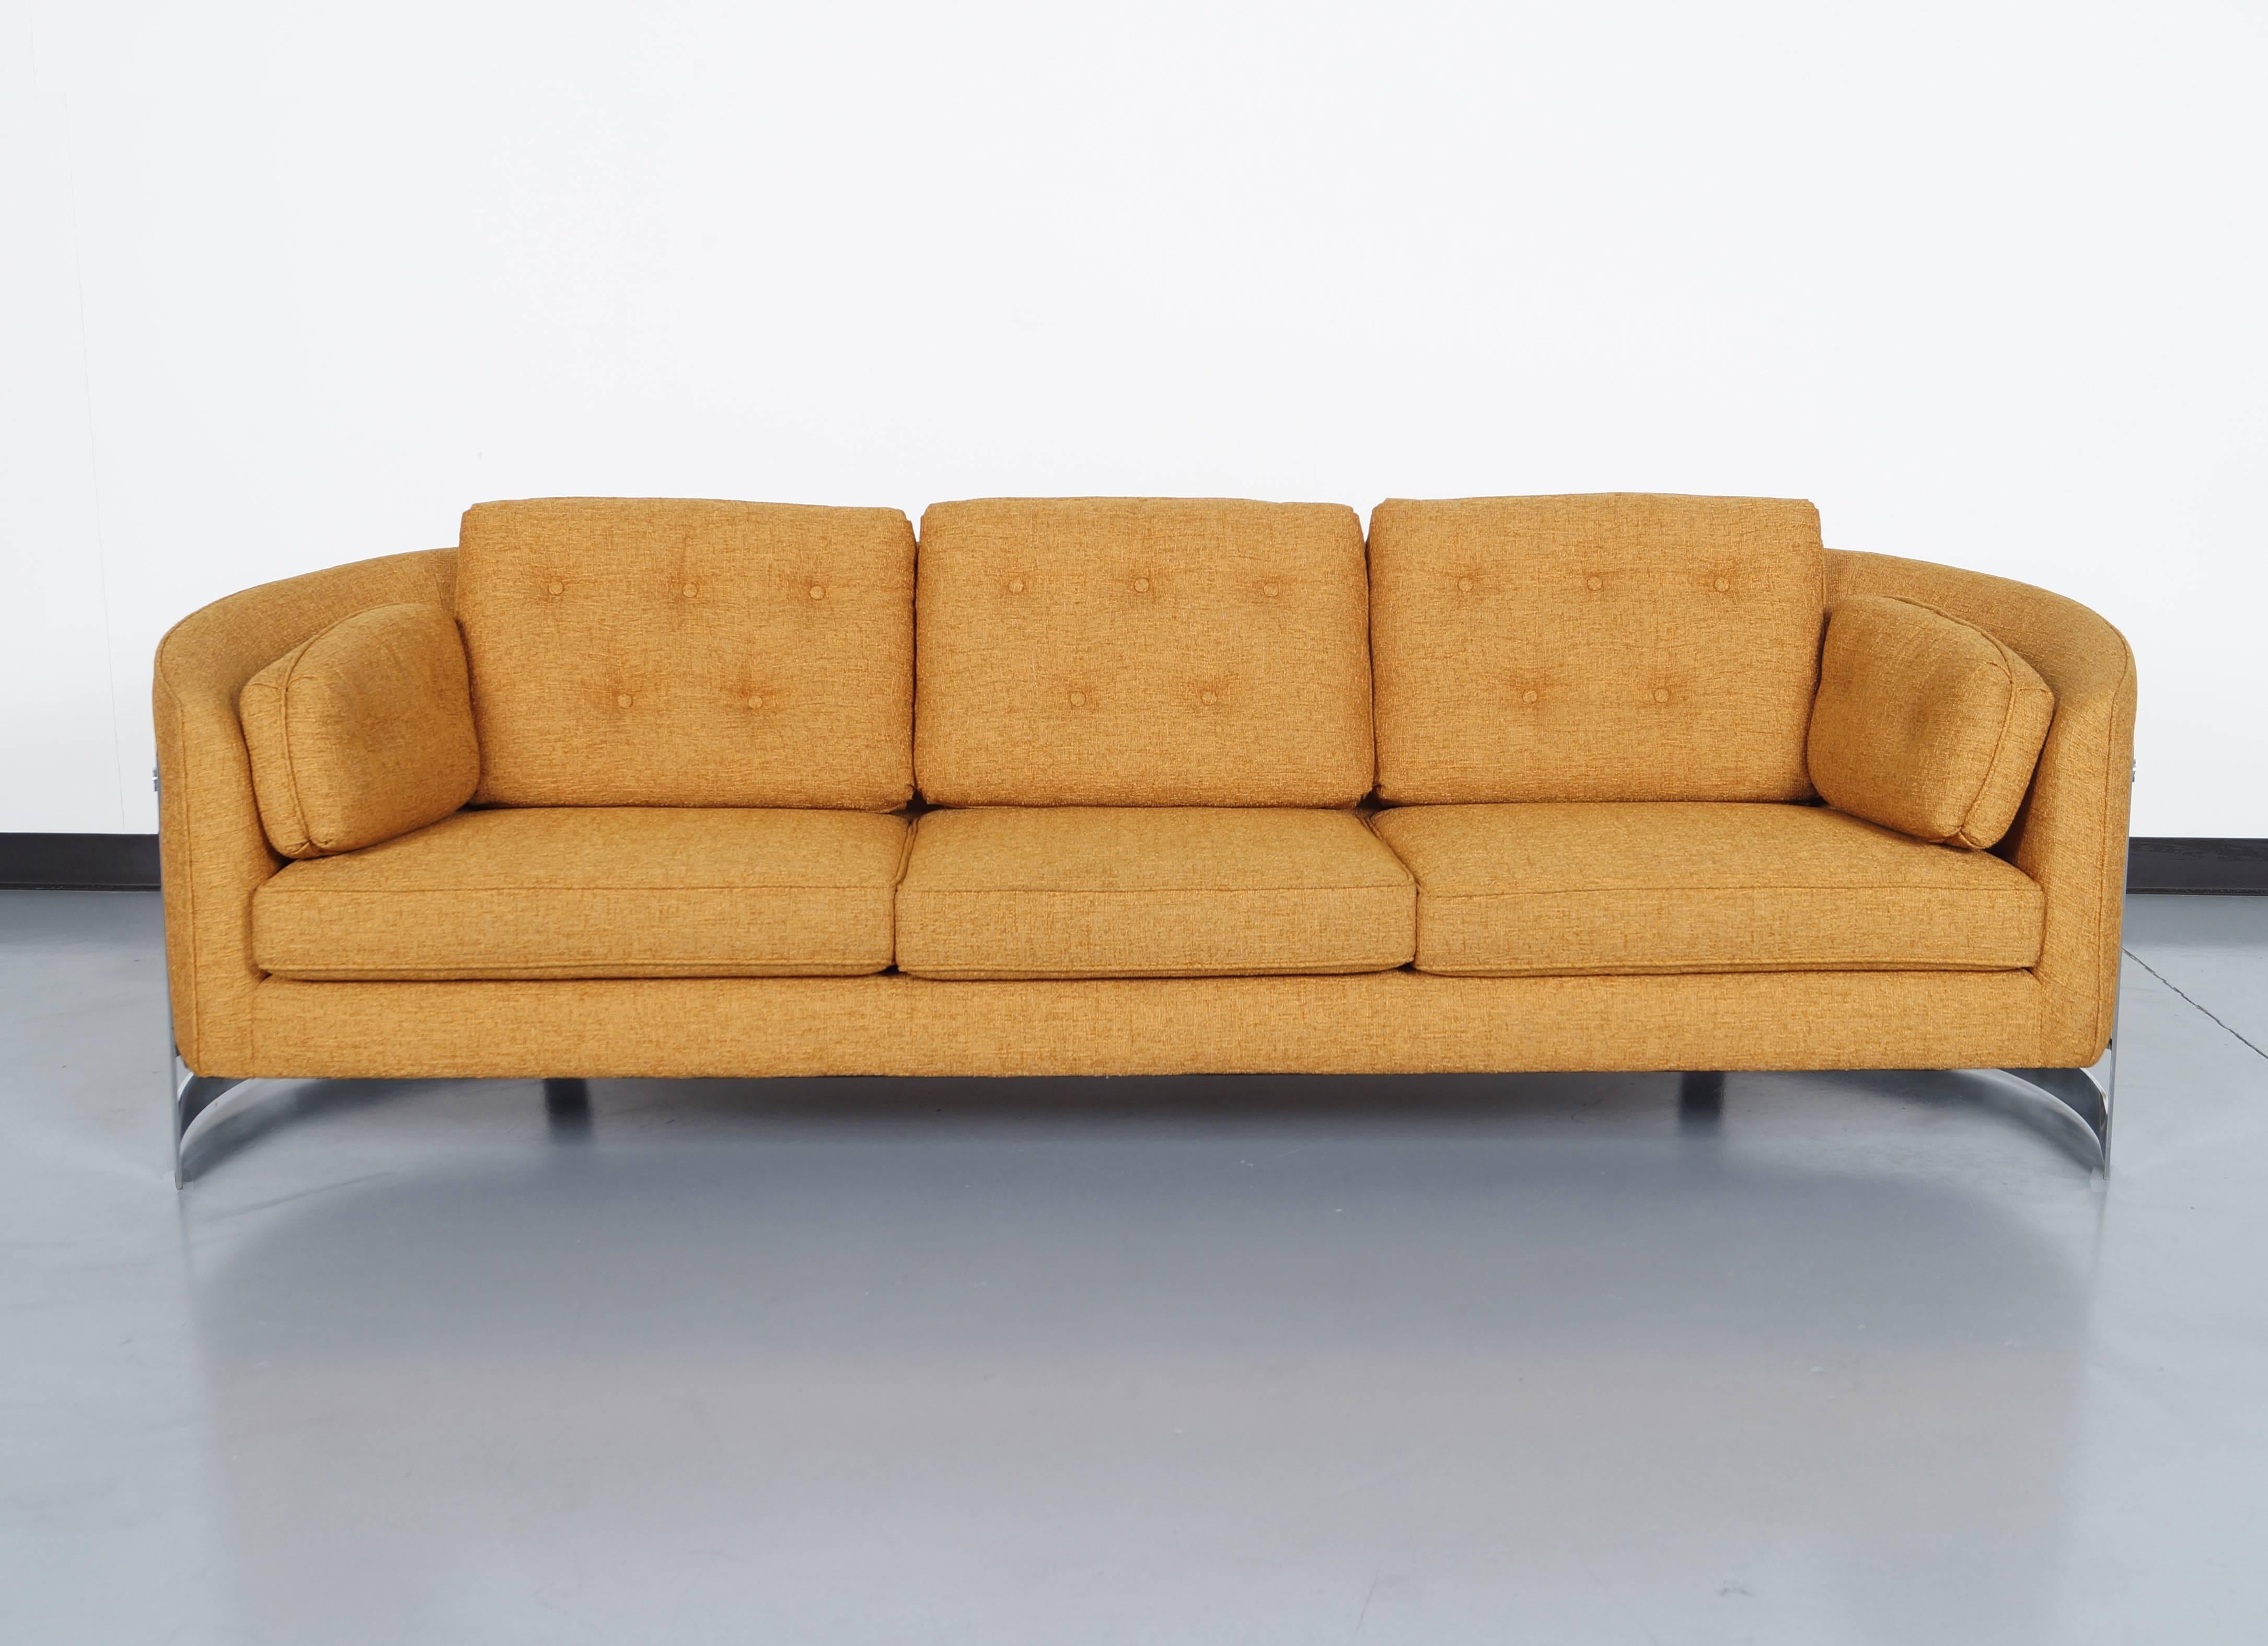 A stunning vintage floating chrome sofa attributed to Milo Baughman in United States circa 1970s. This sofa has been professionally reupholstered in a burnt orange tweed fabric, it shows a modern and avant-garde design expressed through the curves